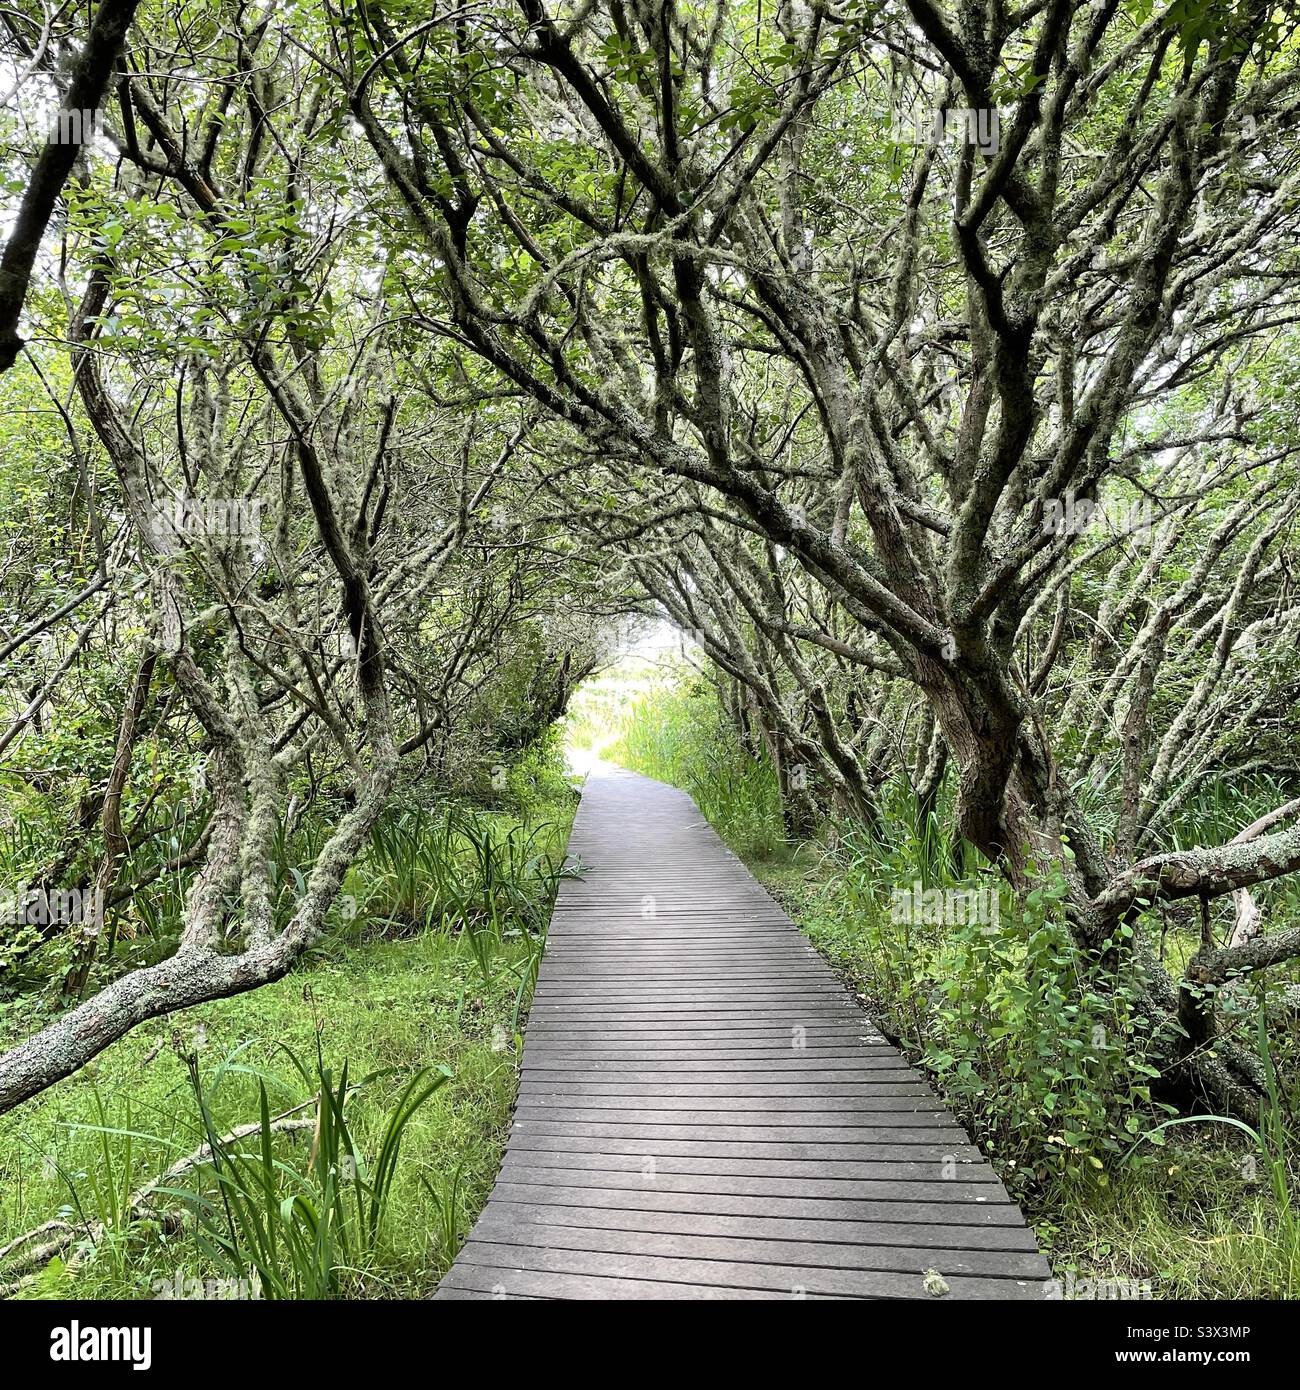 Walkway through lichen covered woodland with the appearance of an enchanted forest. St Mary’s, Isles of Scilly, Cornwall, England, UK. Stock Photo